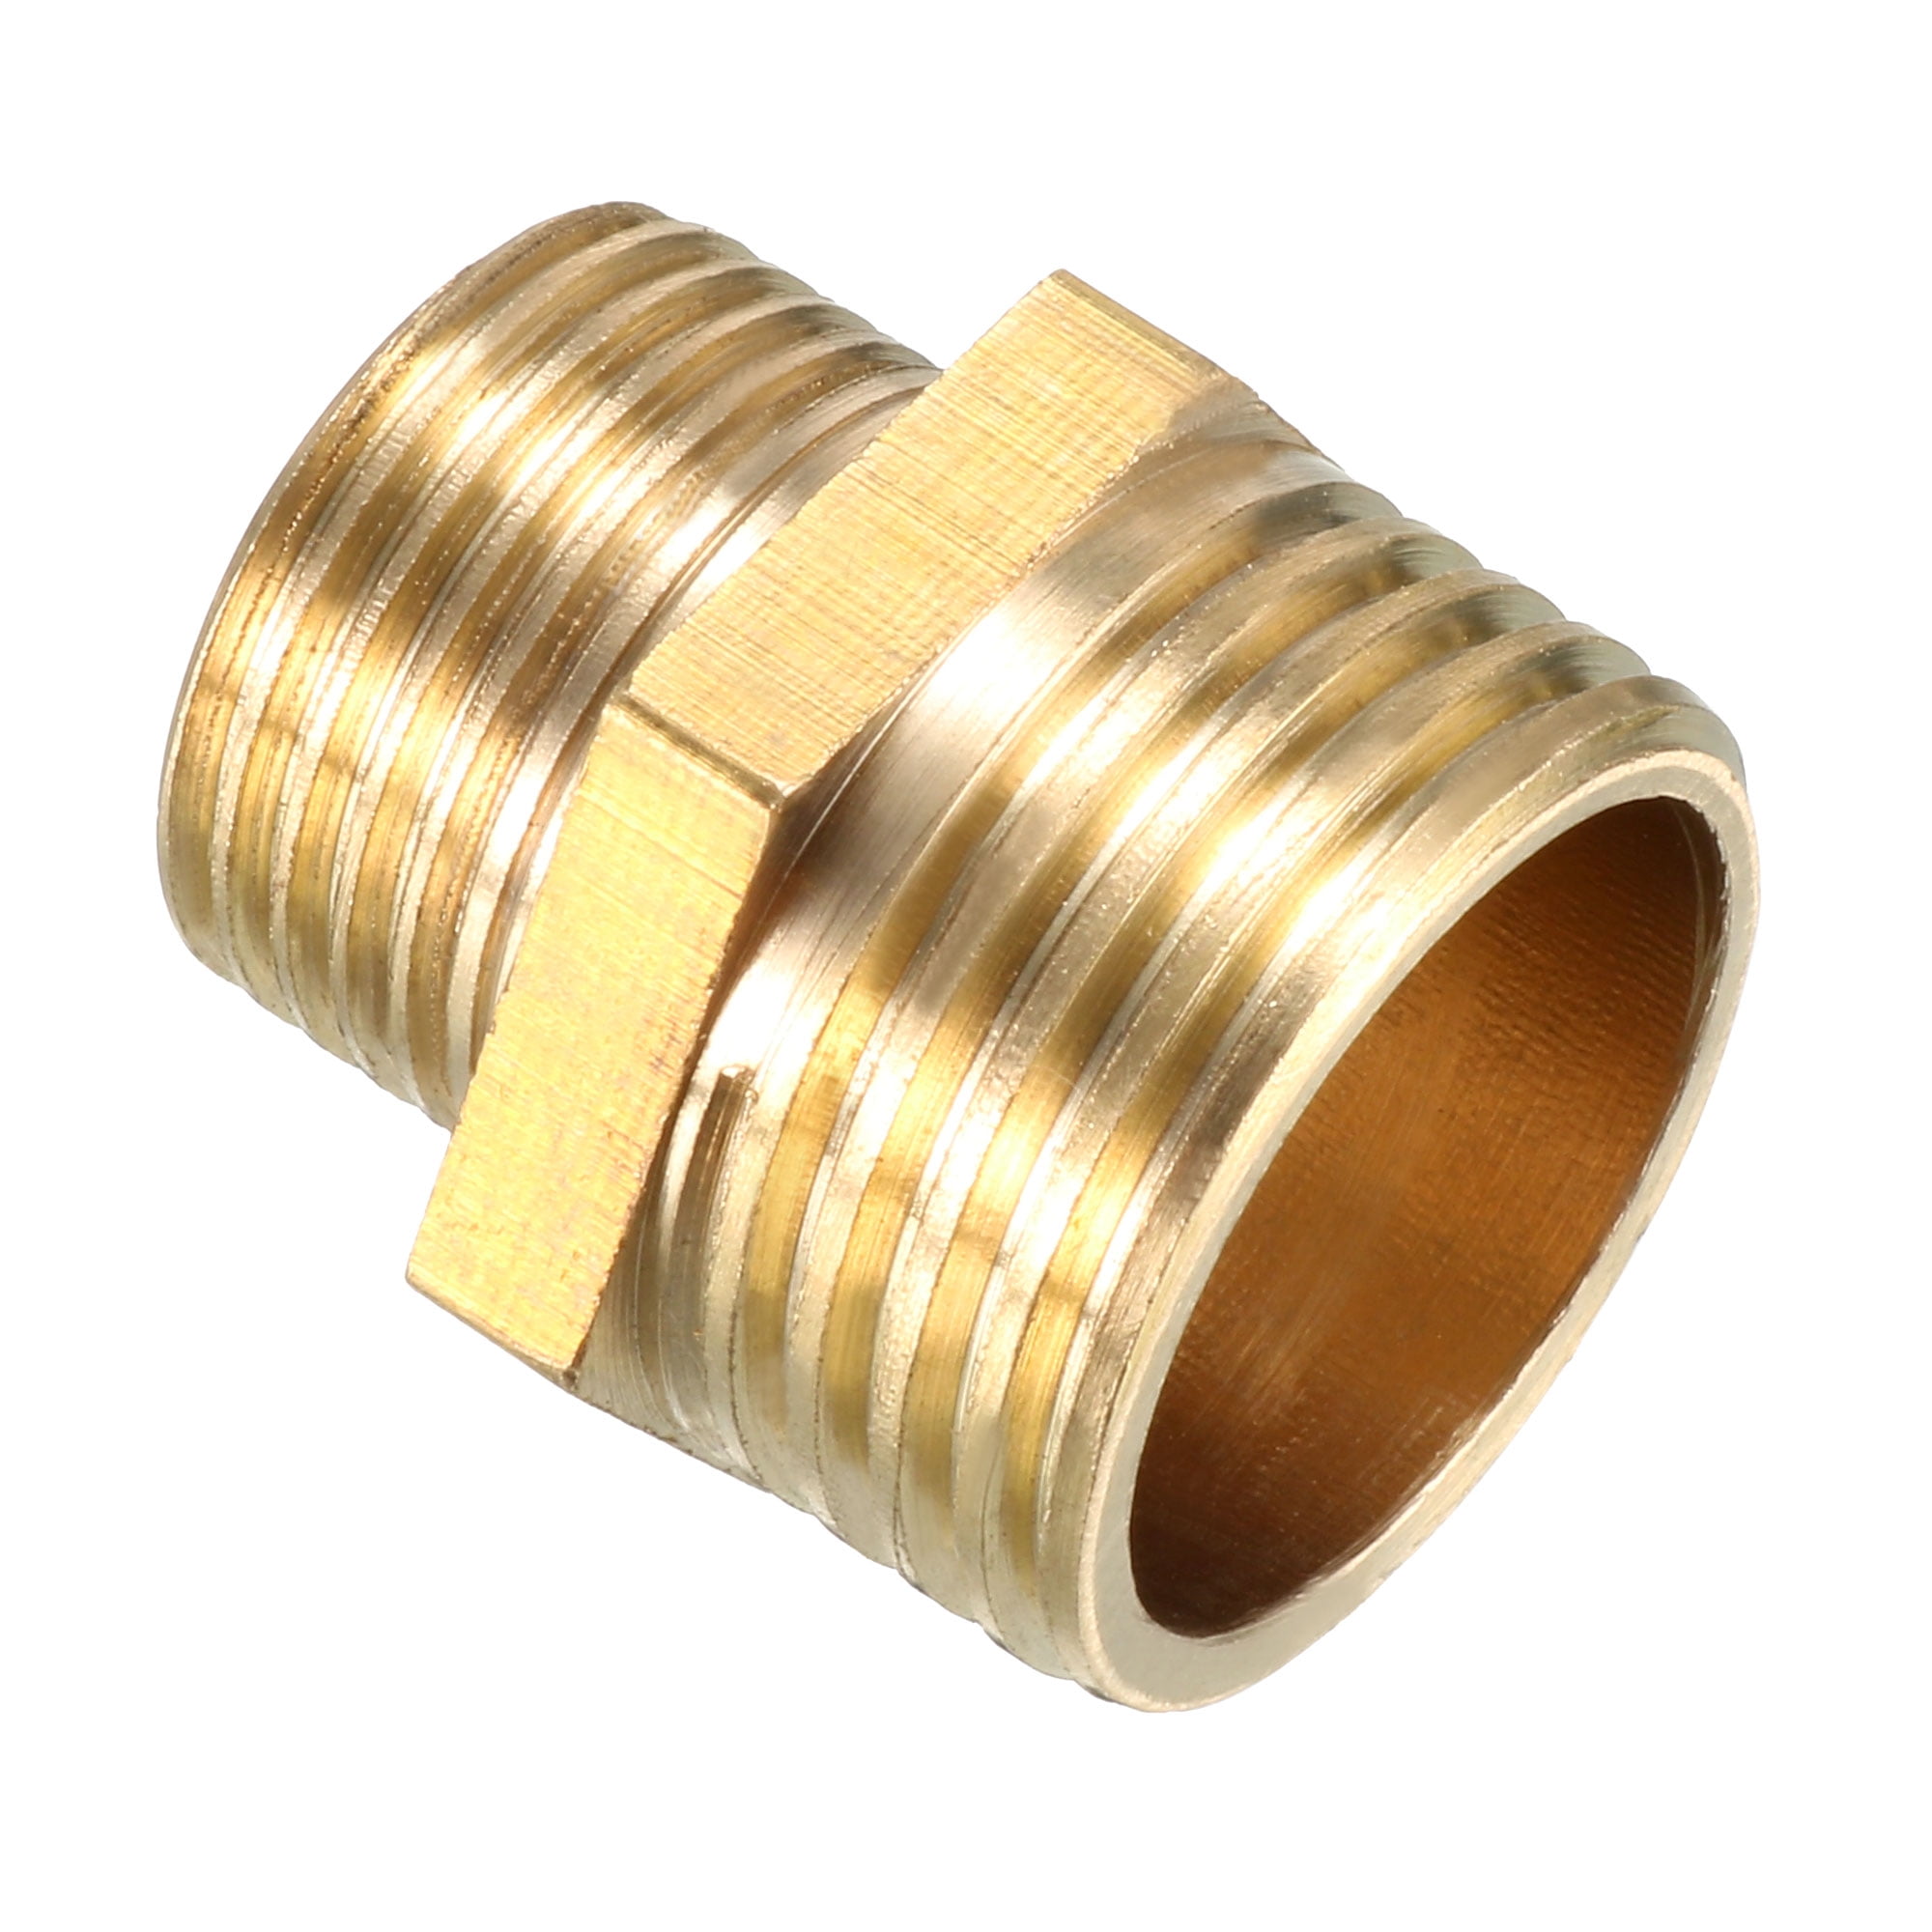 3/8" Male BSPP Brass Pipe Fitting Equal Hex Nipple Connector 